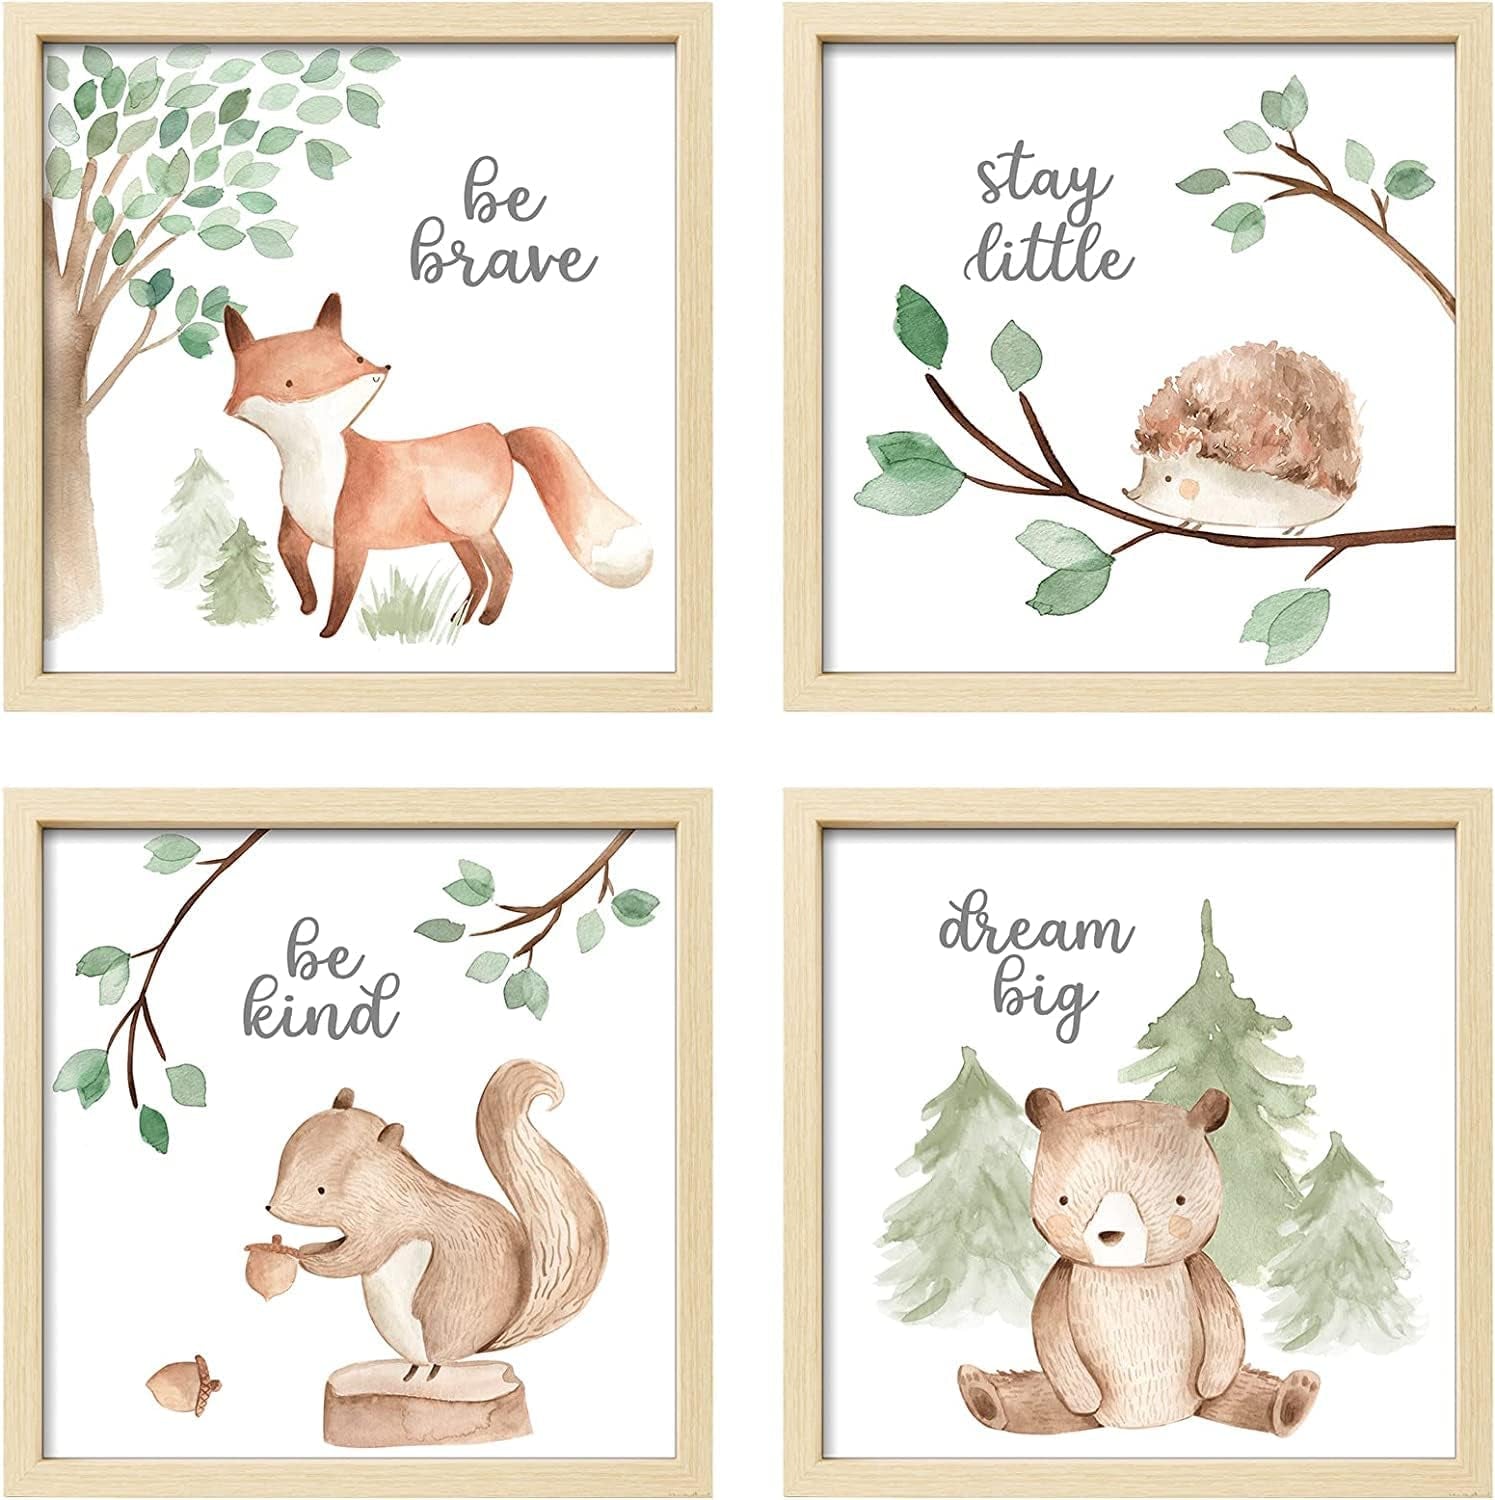 4 Pack Framed Funny Woodland Baby Nursery Wall Art Decor with 10X10 Wood Frames and Cute Safari Animals Prints for Kids Playroom Decoration, Light-Wood